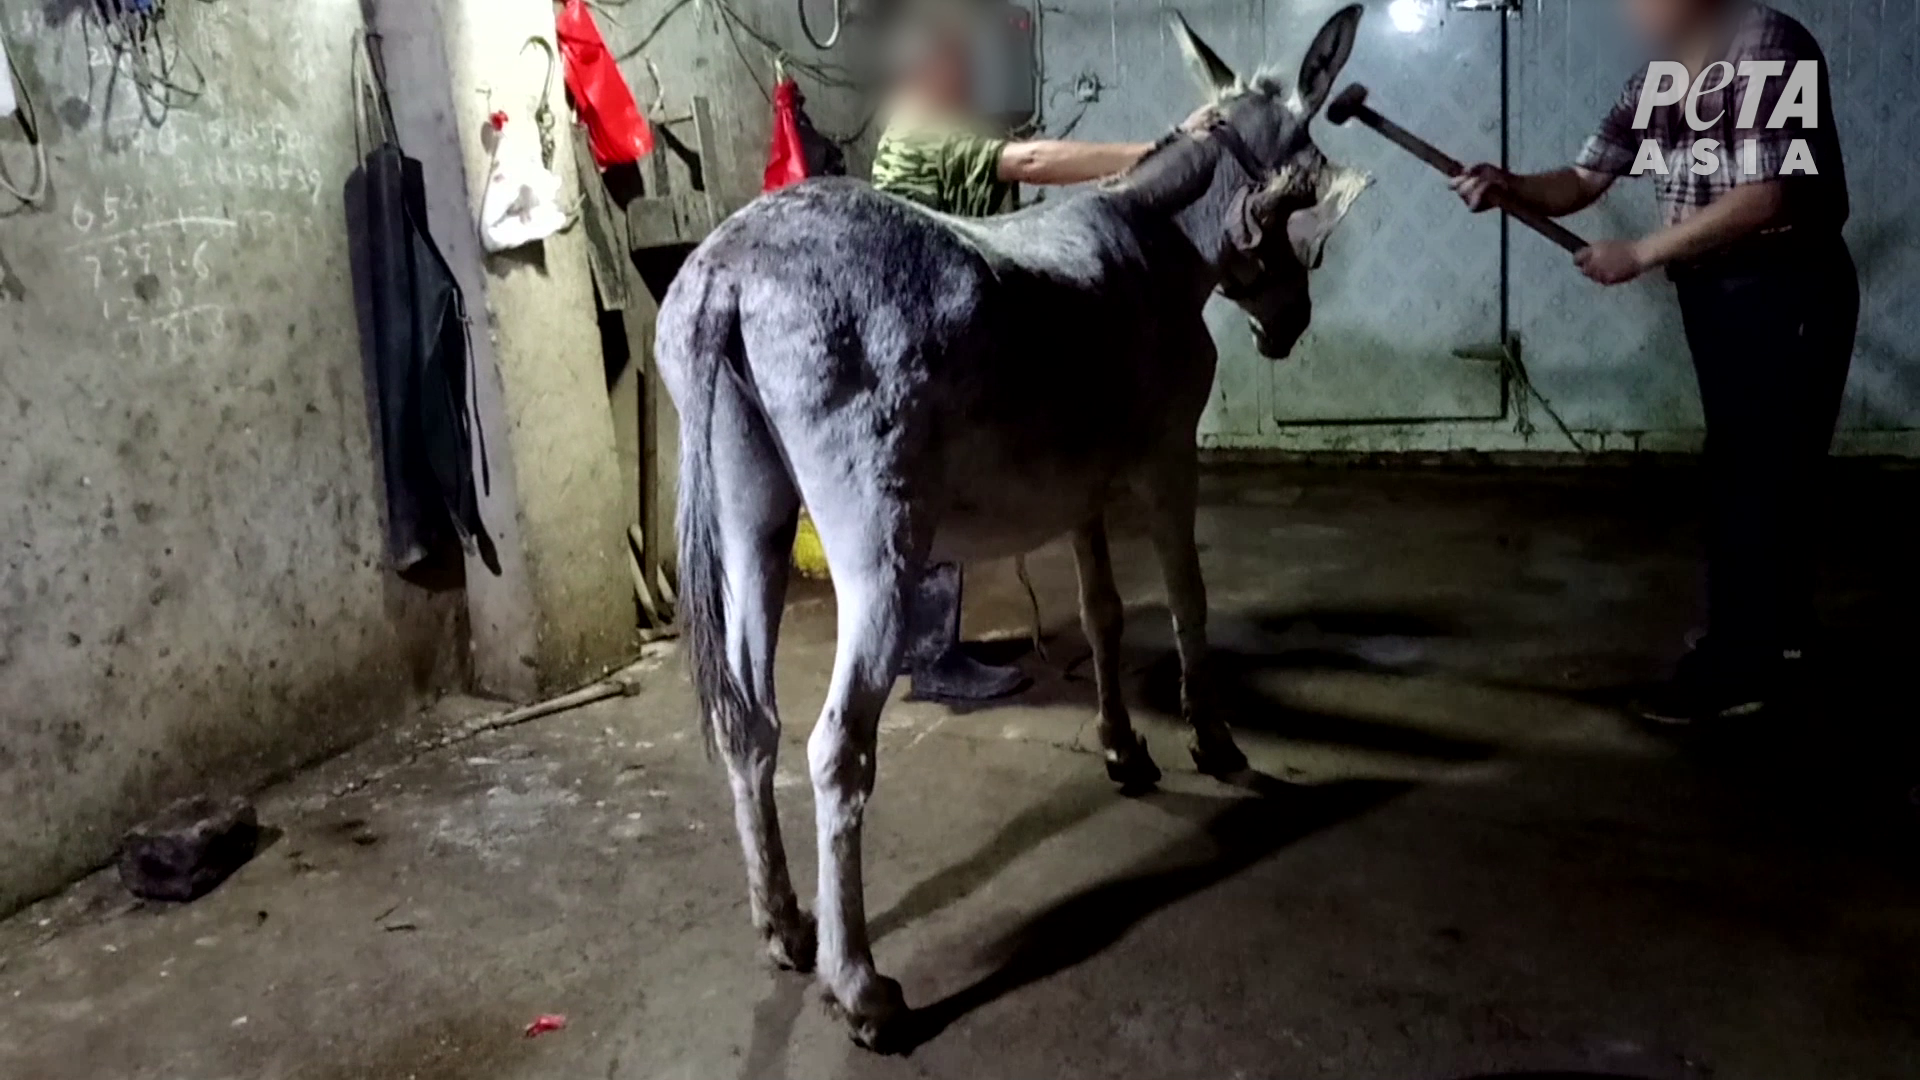 At least 1.8 million donkey hides are traded a year